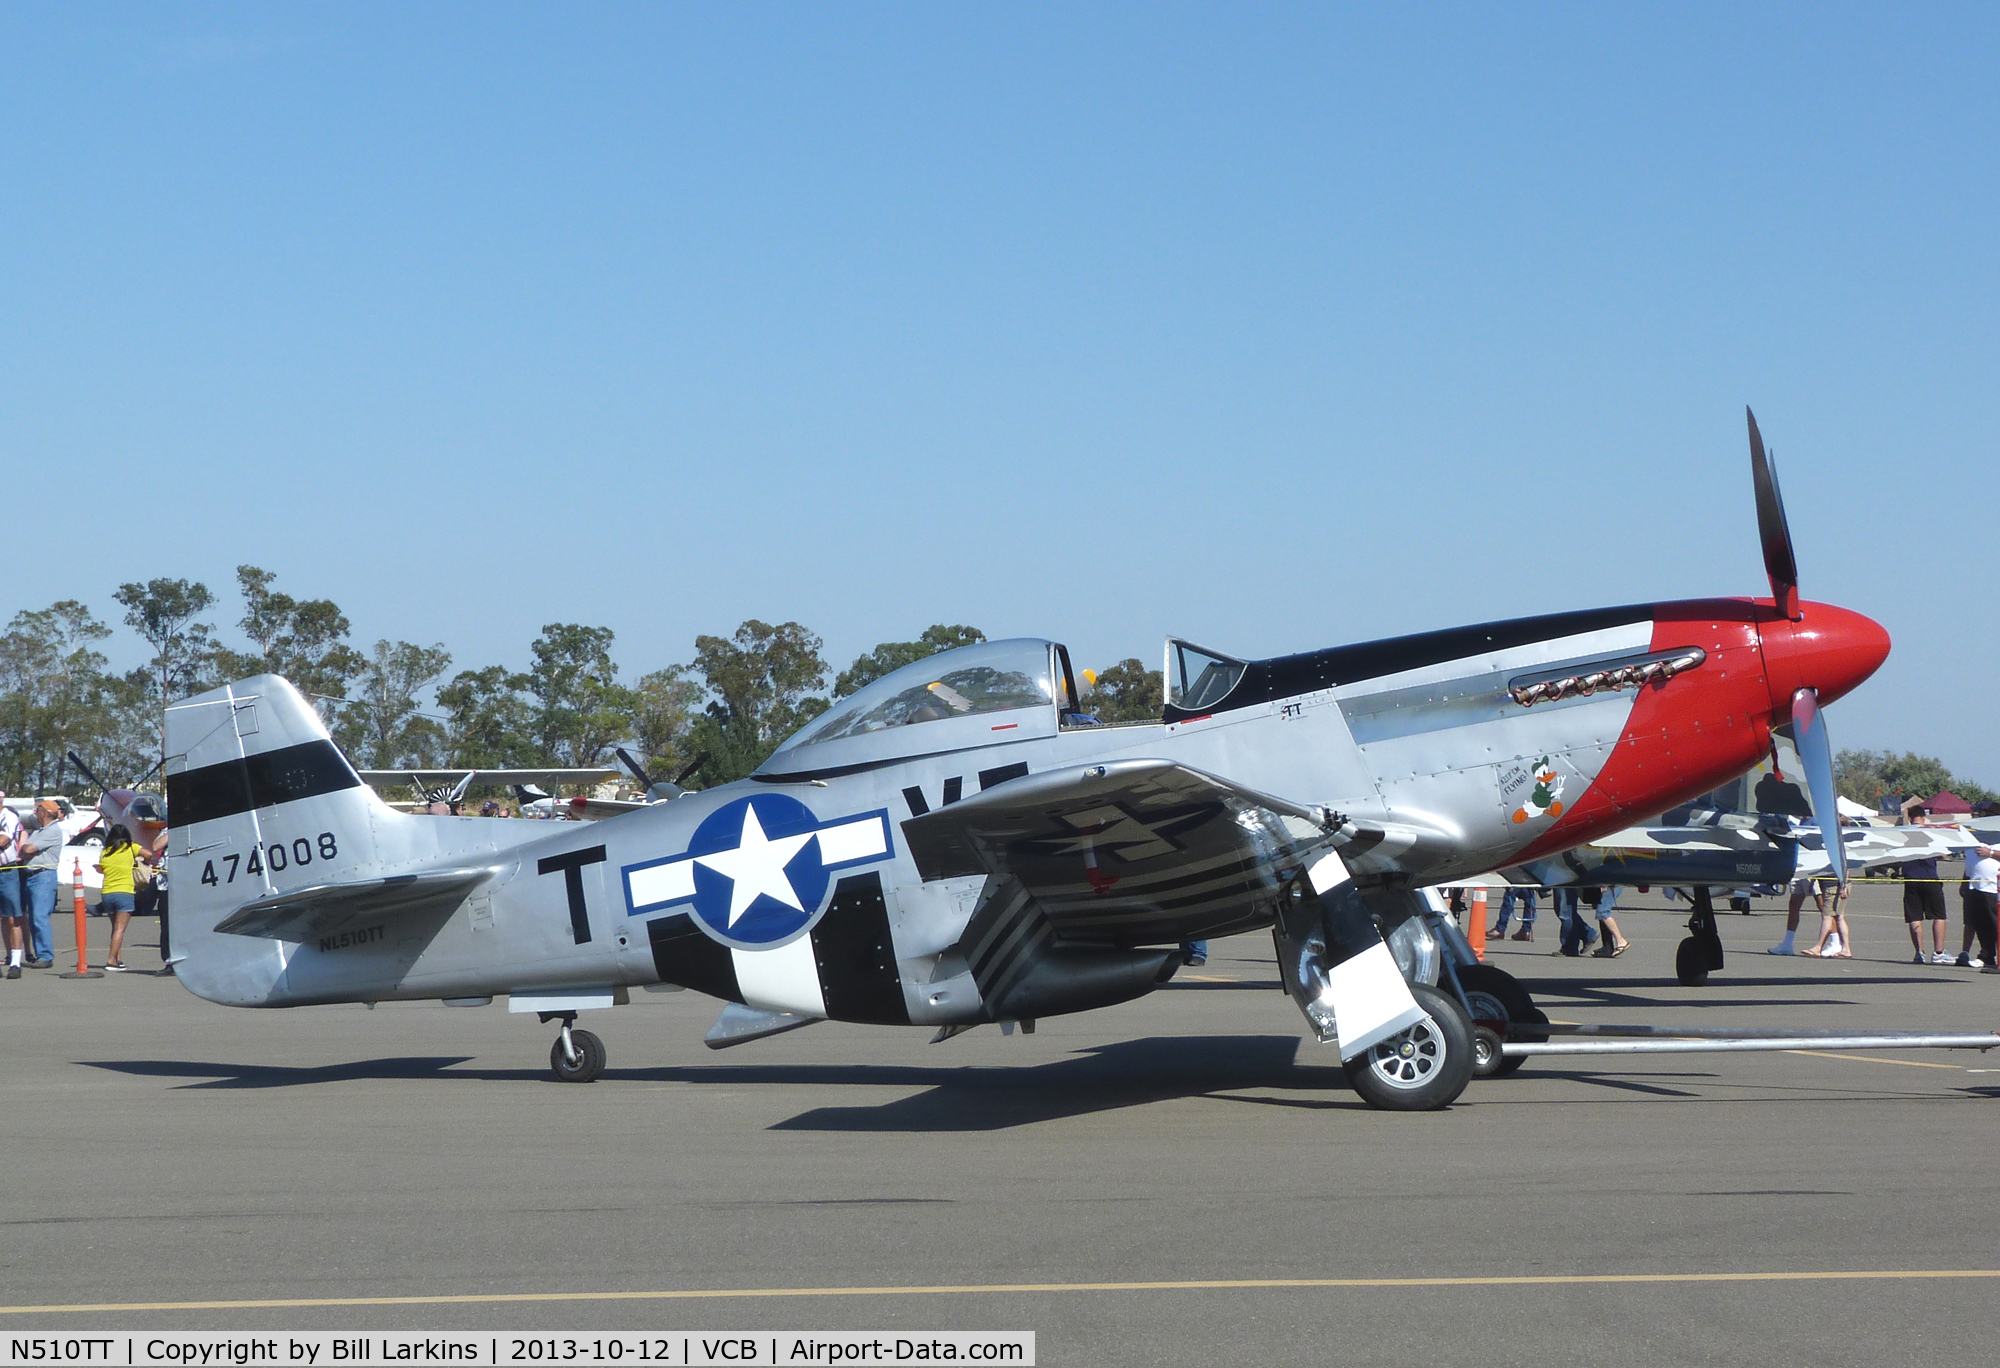 N510TT, 1944 North American F-51D Mustang C/N 44-74008, At the Nut Tree for Mustang Day